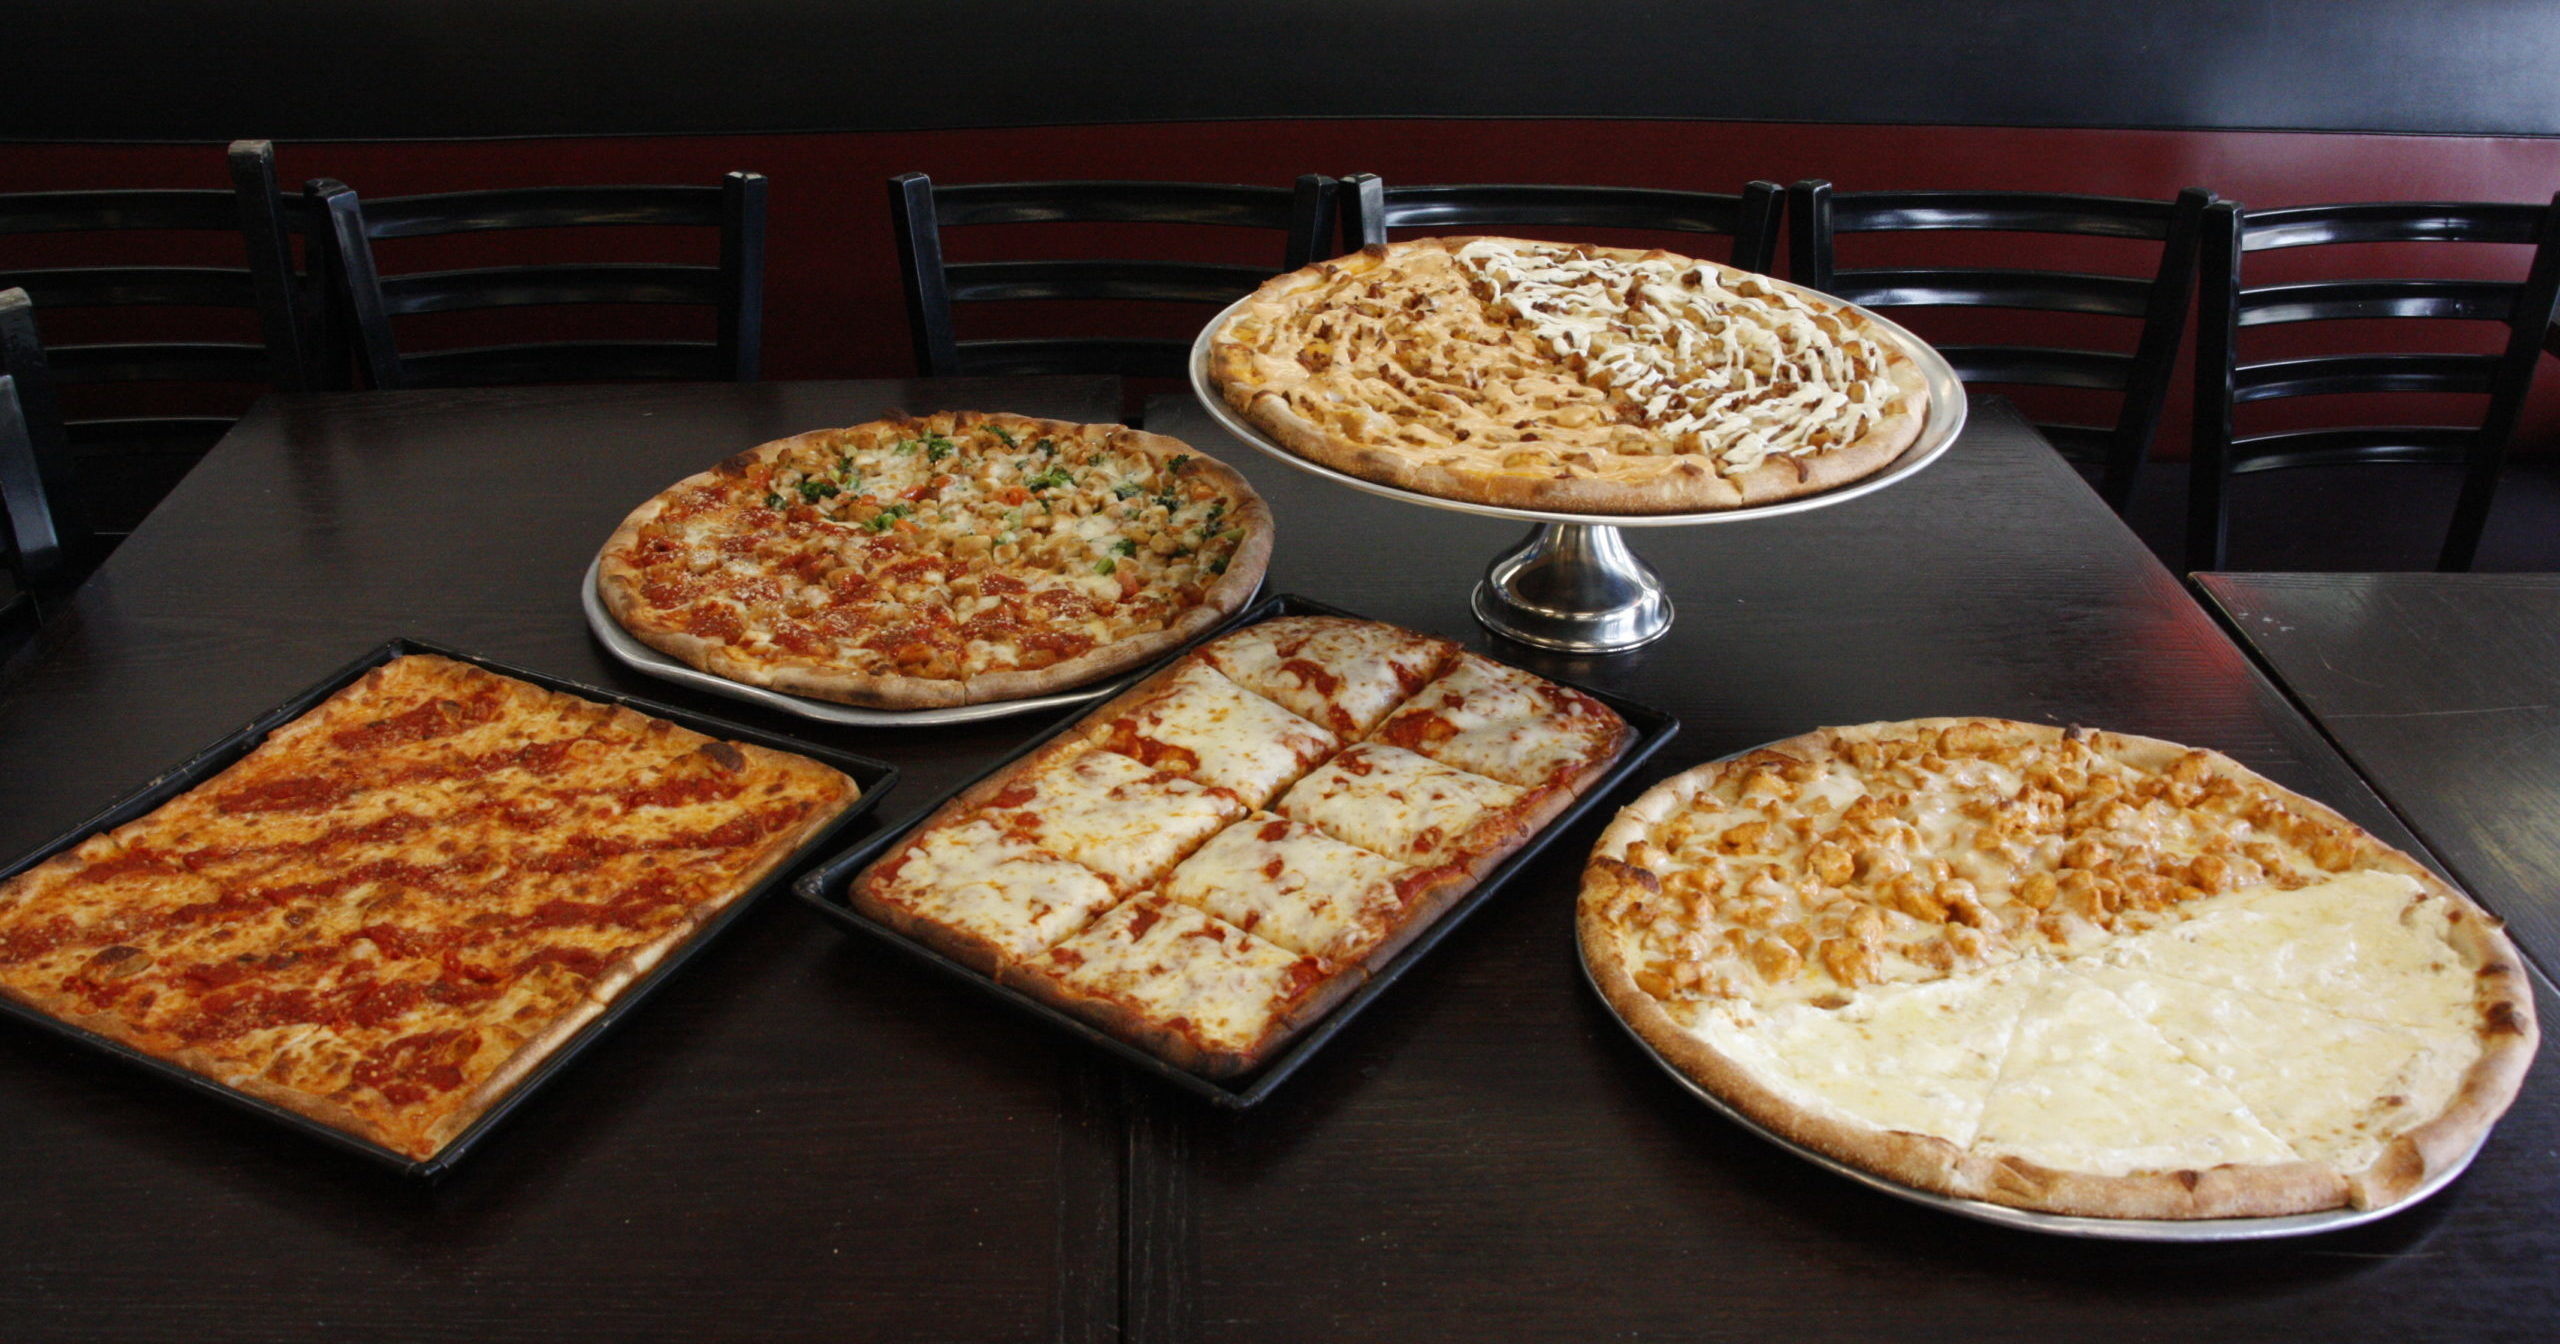 A wide variety of pies and italian specialities